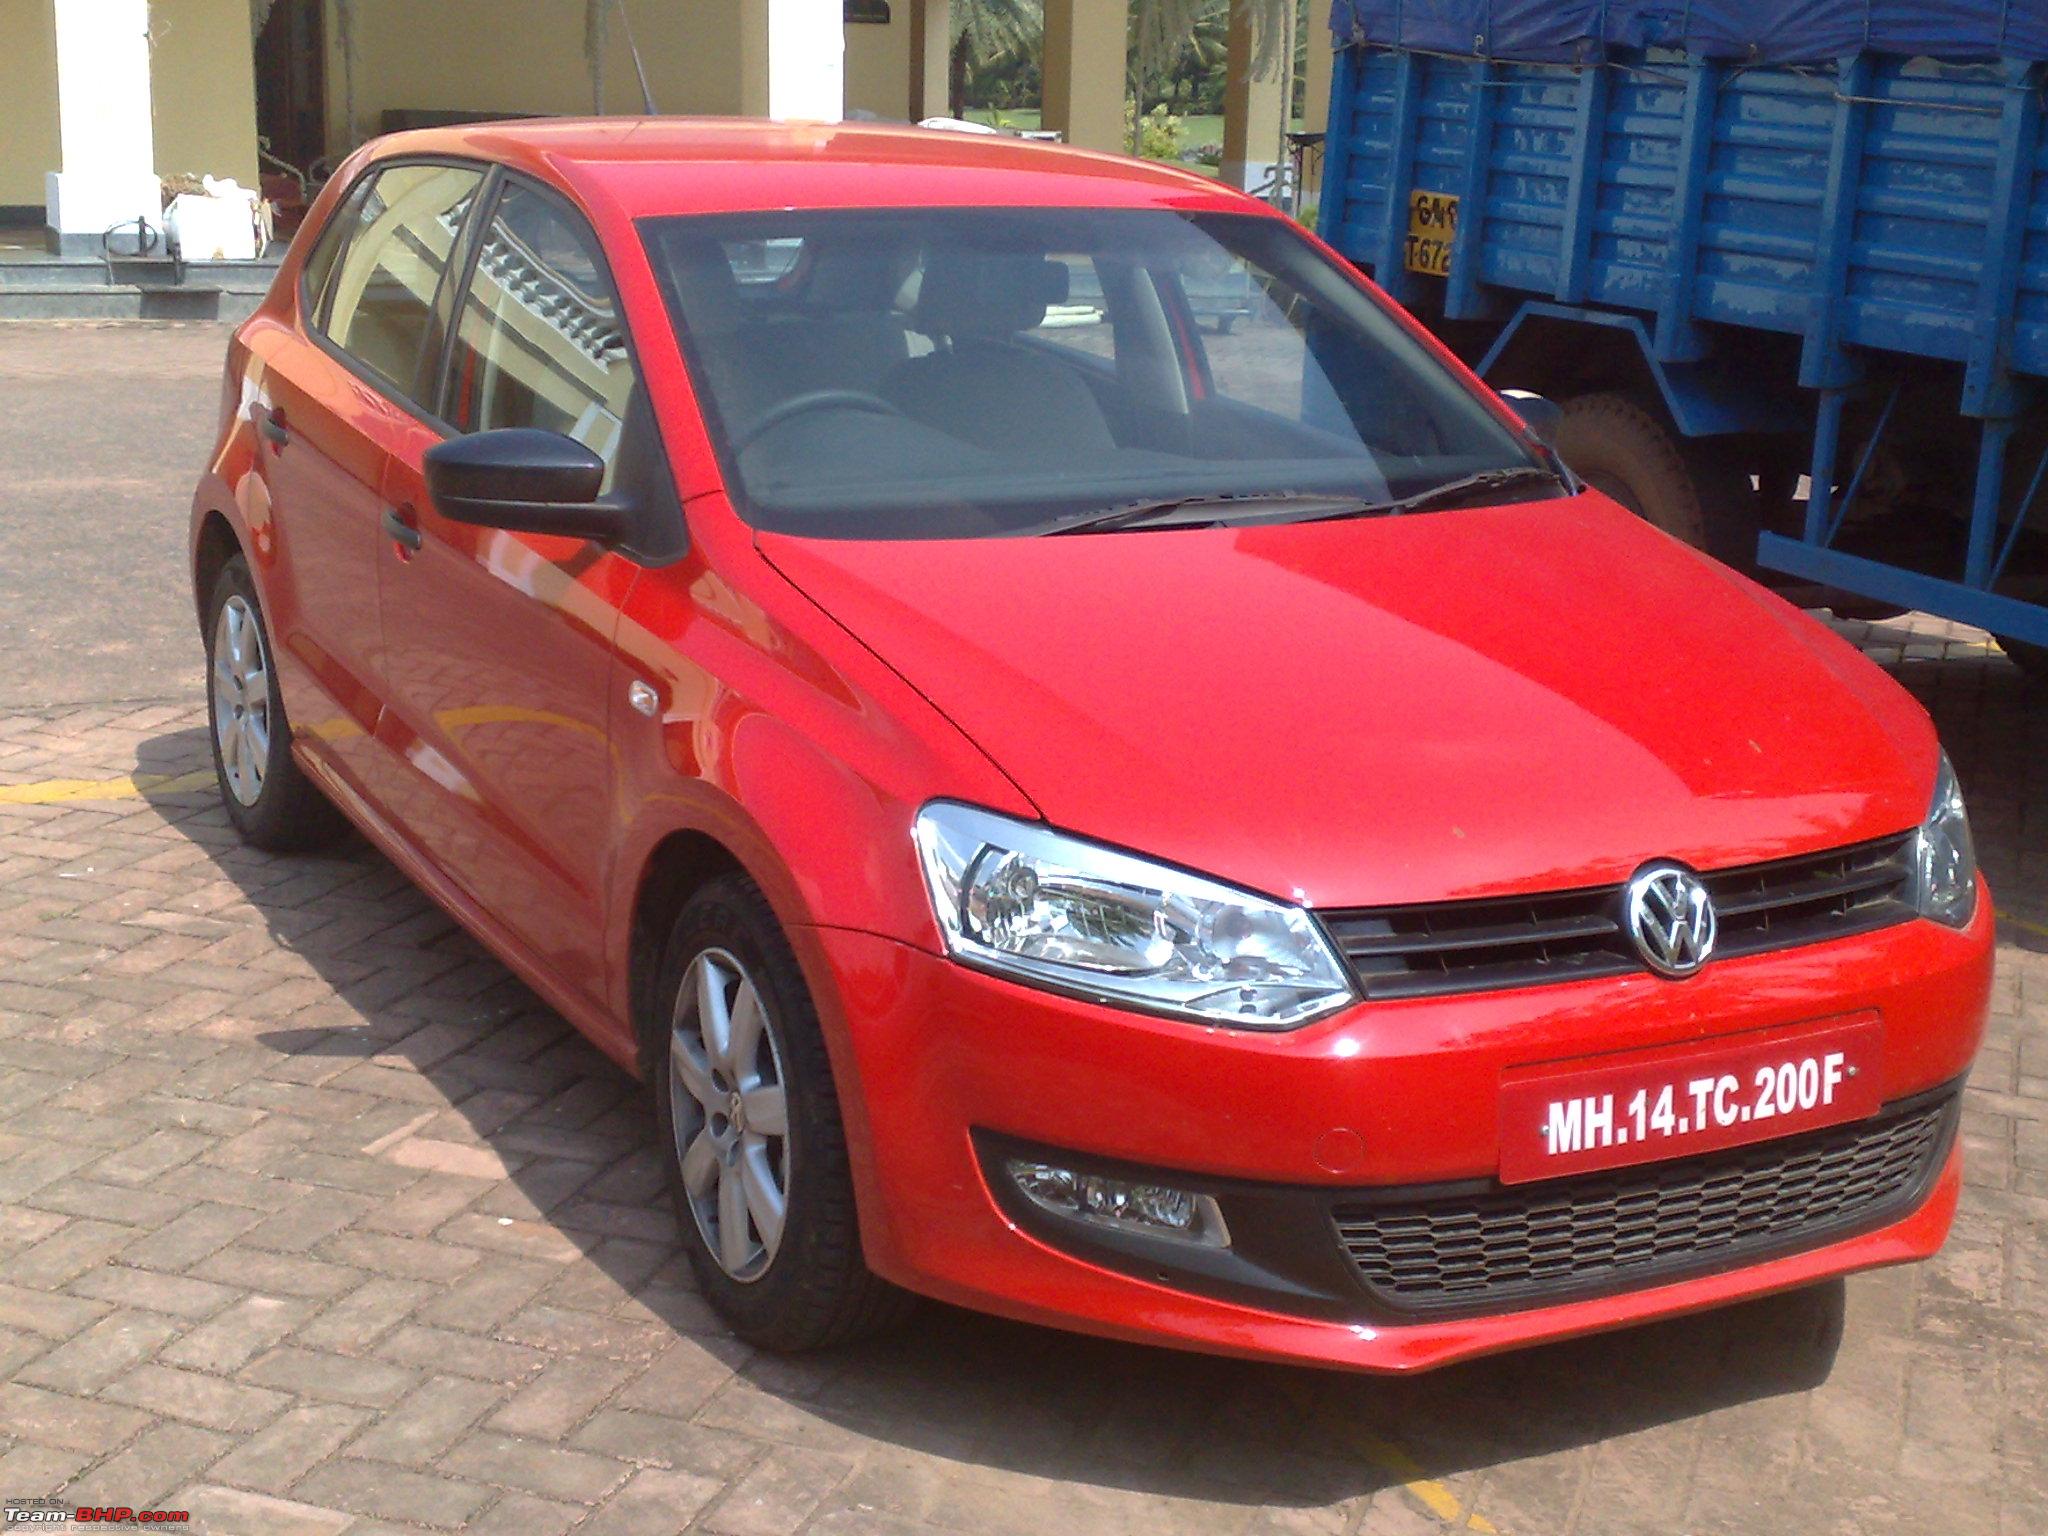 201181d1254485856-production-ready-vw-polo-spotted-pg-11-270920091197.jpg